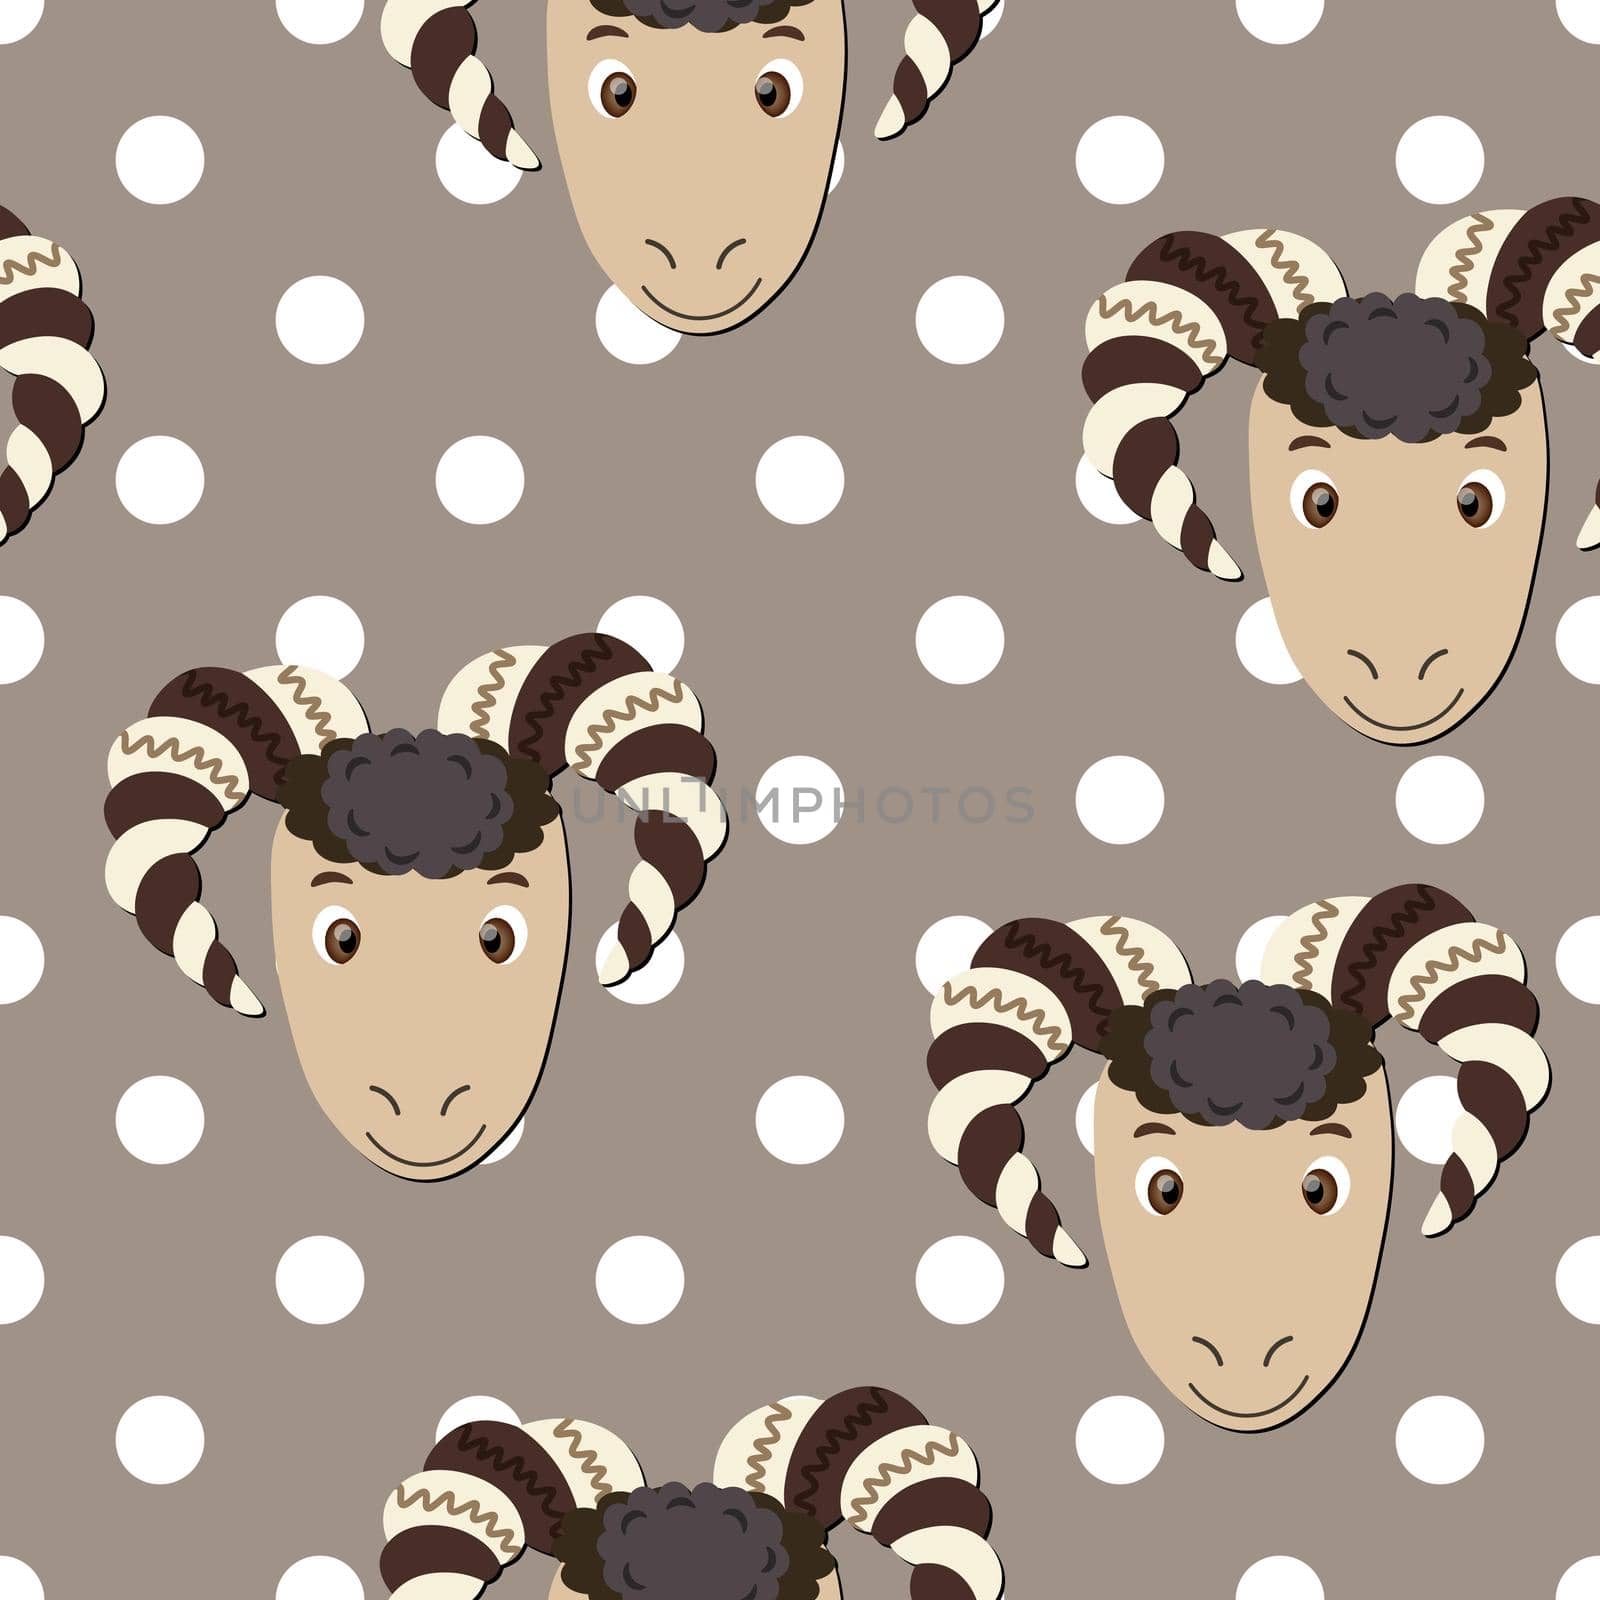 Vector flat animals colorful illustration for kids. Seamless pattern with ram face on beige polka dots background. Cute sheep. Adorable cartoon character. Design for textures, card, fabric, textile. by allaku